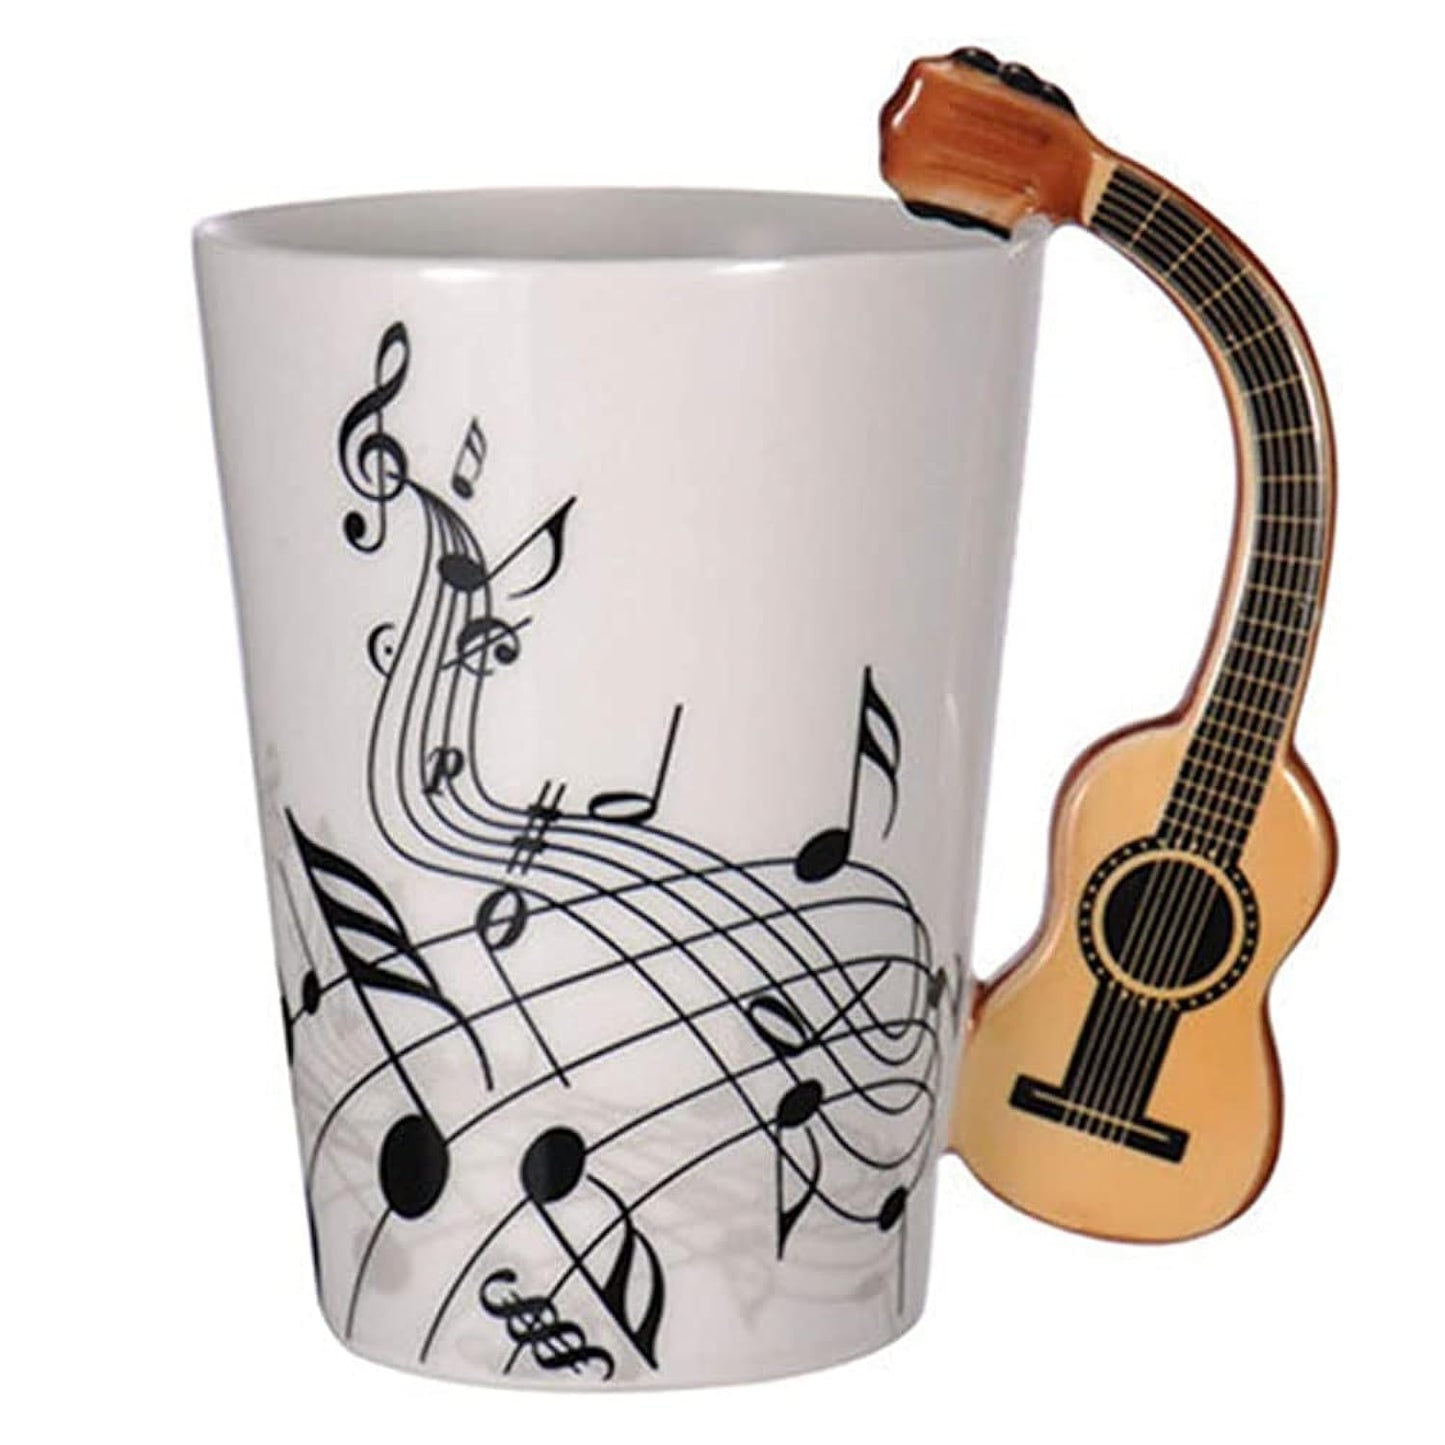 Music Note Ceramic Coffee Mug Creative China Tea Cup With Classical Guitar Handle, 400Ml Milk Cups Home Cafe For Music Lover/Friend/Men/Women,Birthday, Valentine'S Day Gift